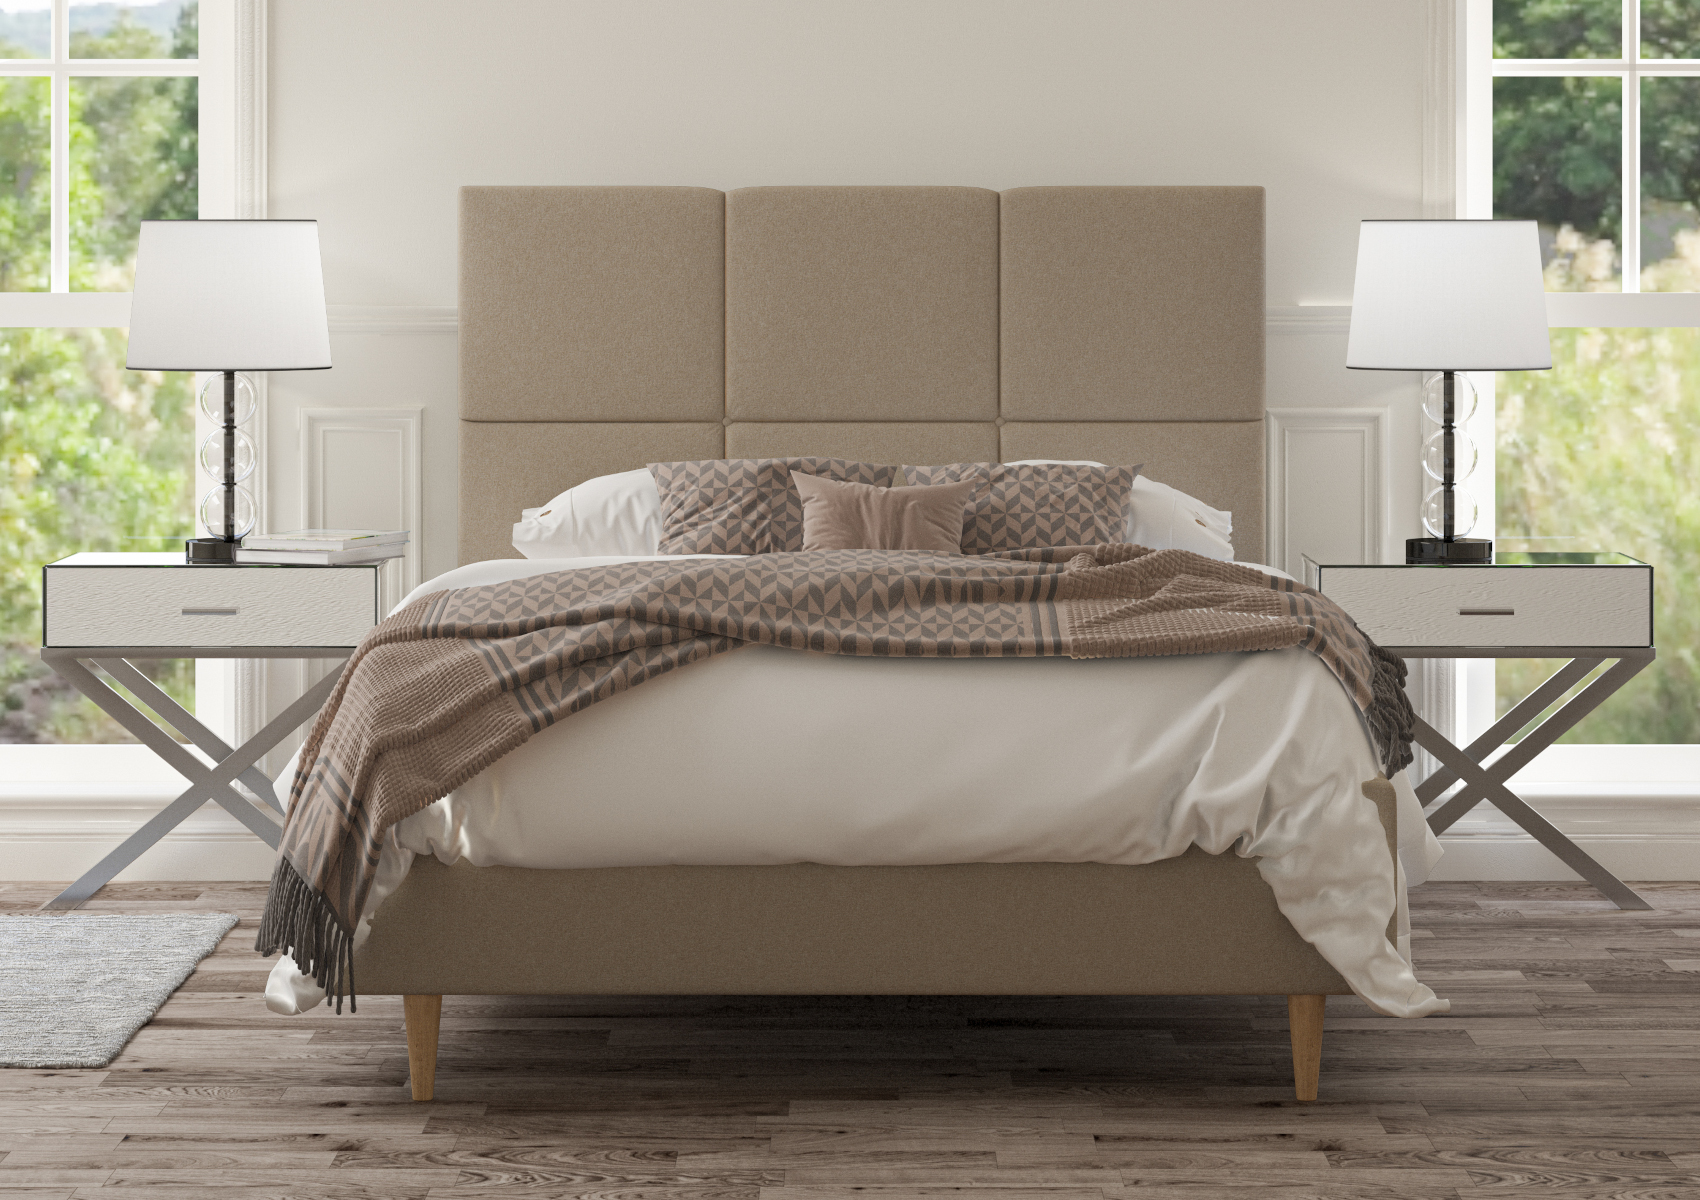 View Lauren Arran Natural Upholstered Compact Double Bed Time4Sleep information